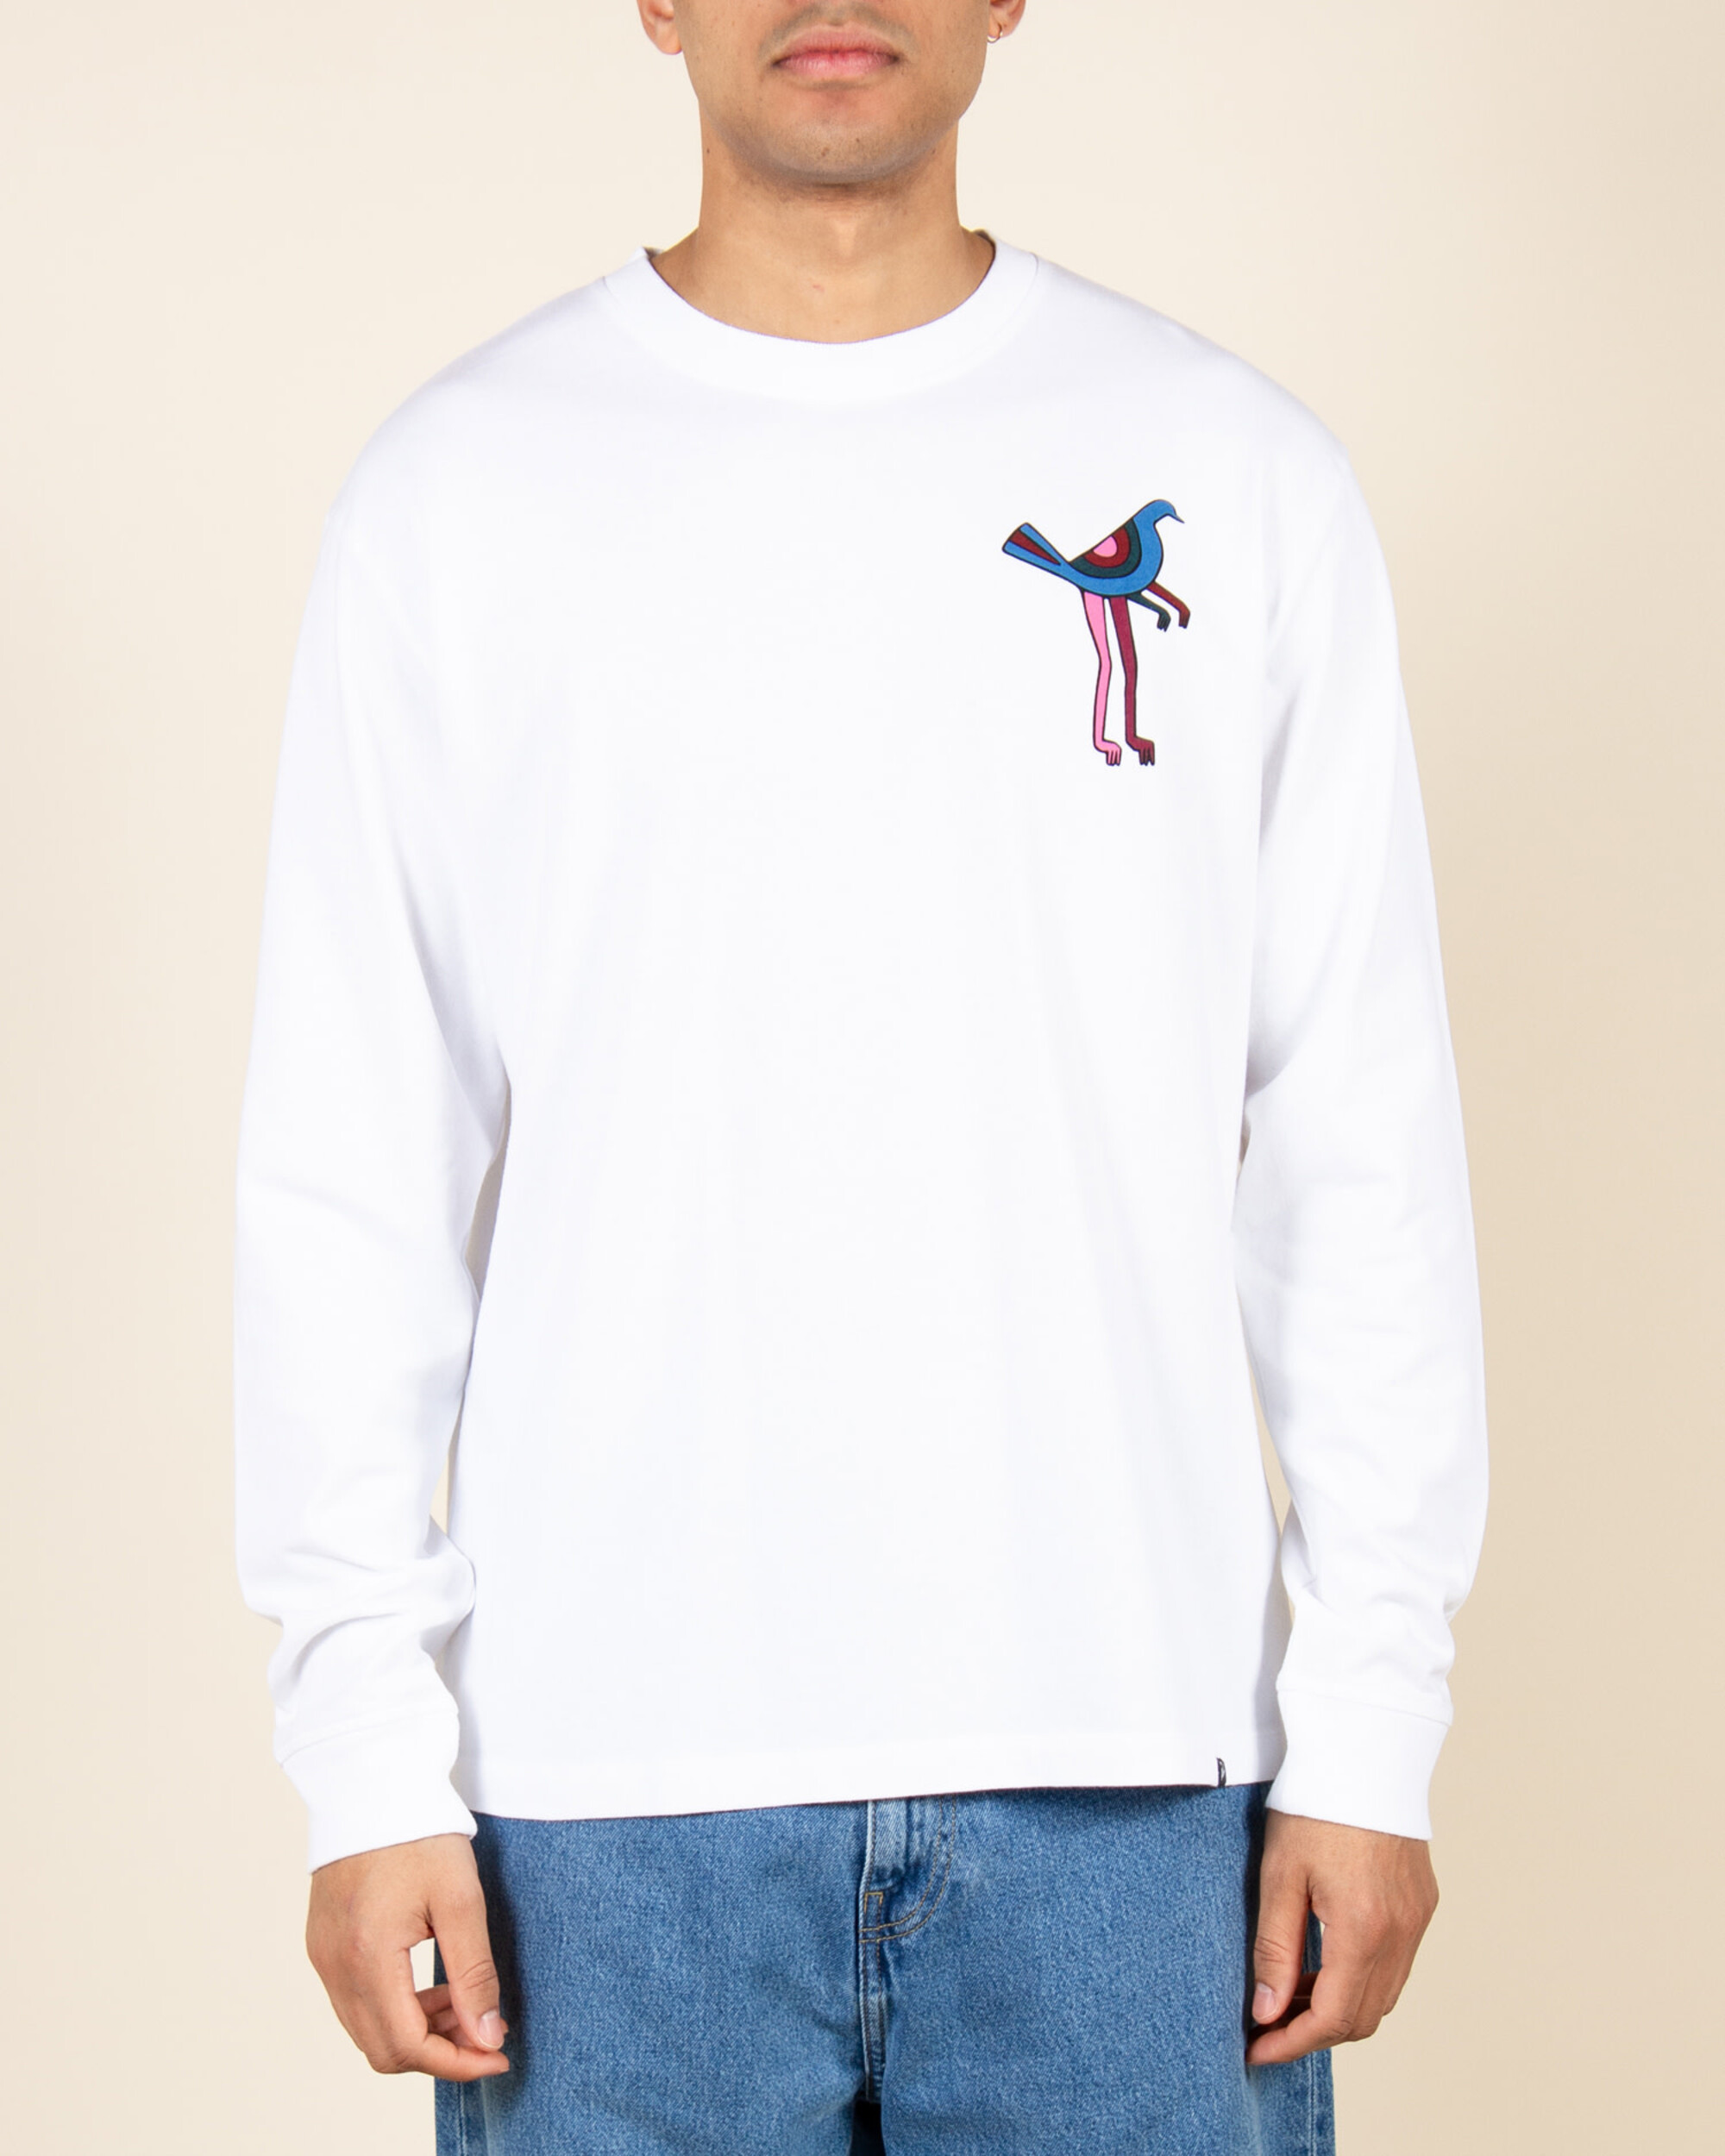 Parra Wine And Books Longsleeve T-Shirt - White